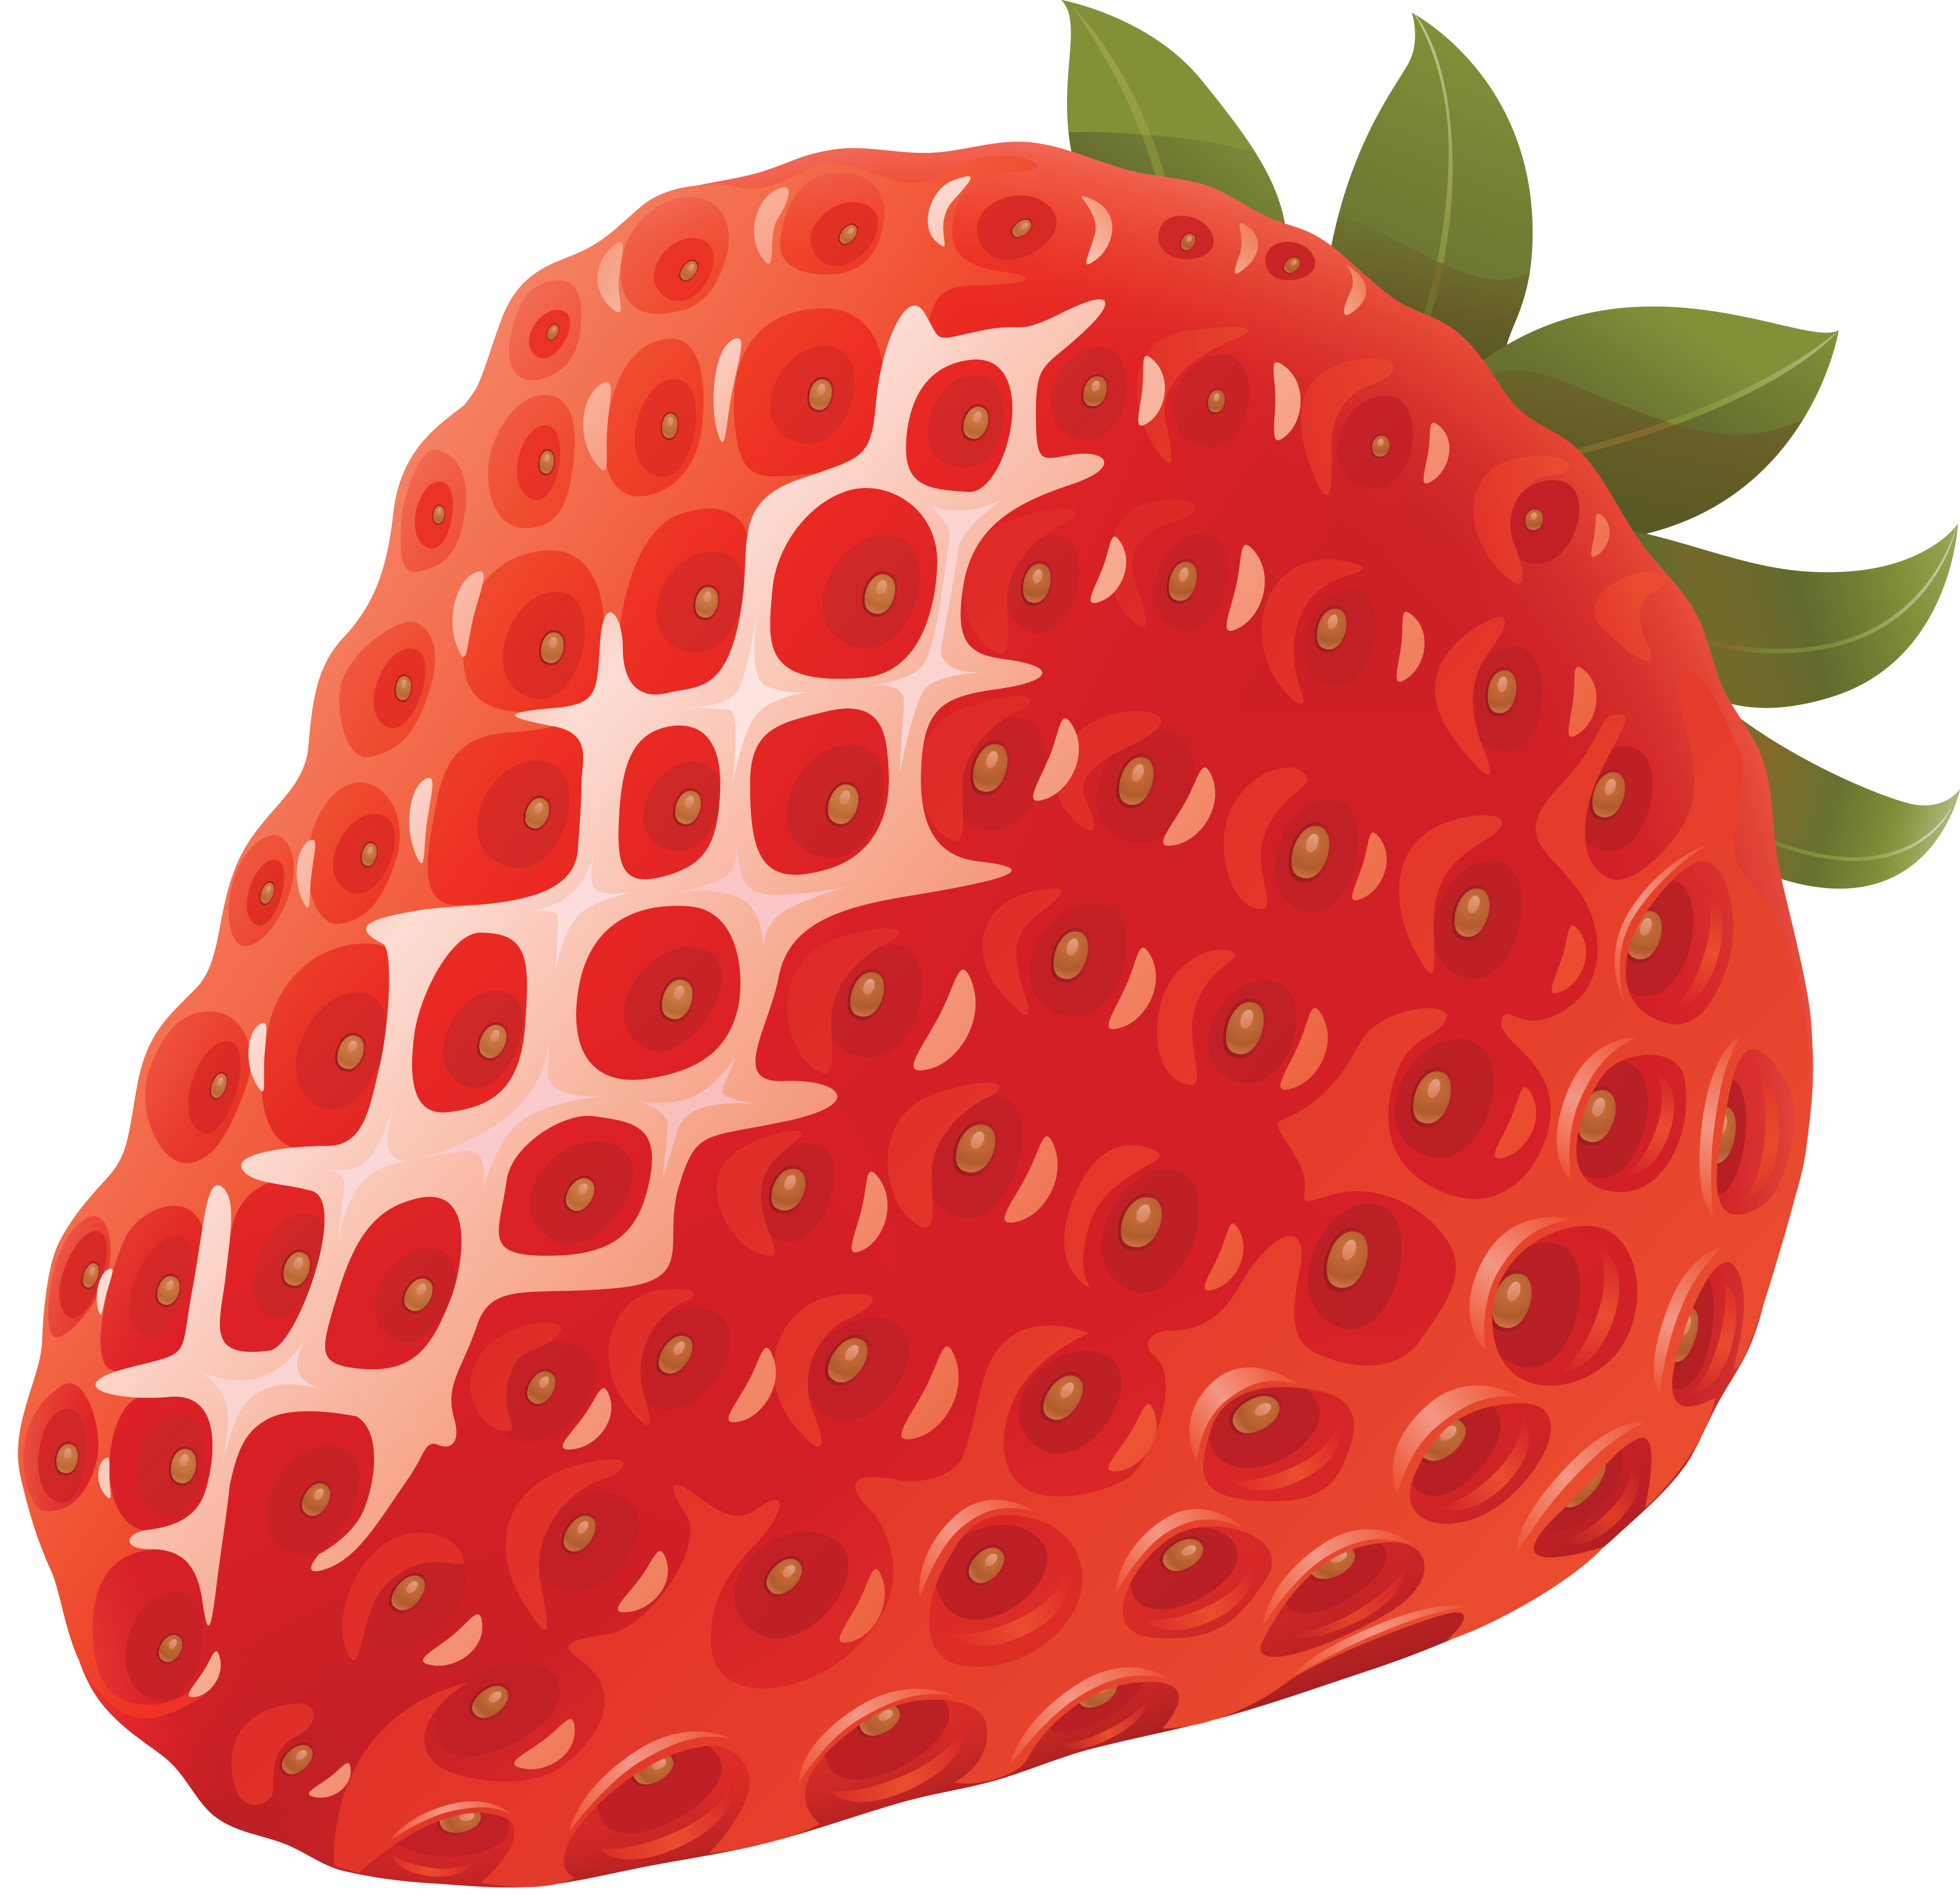 Strawberry PNG images